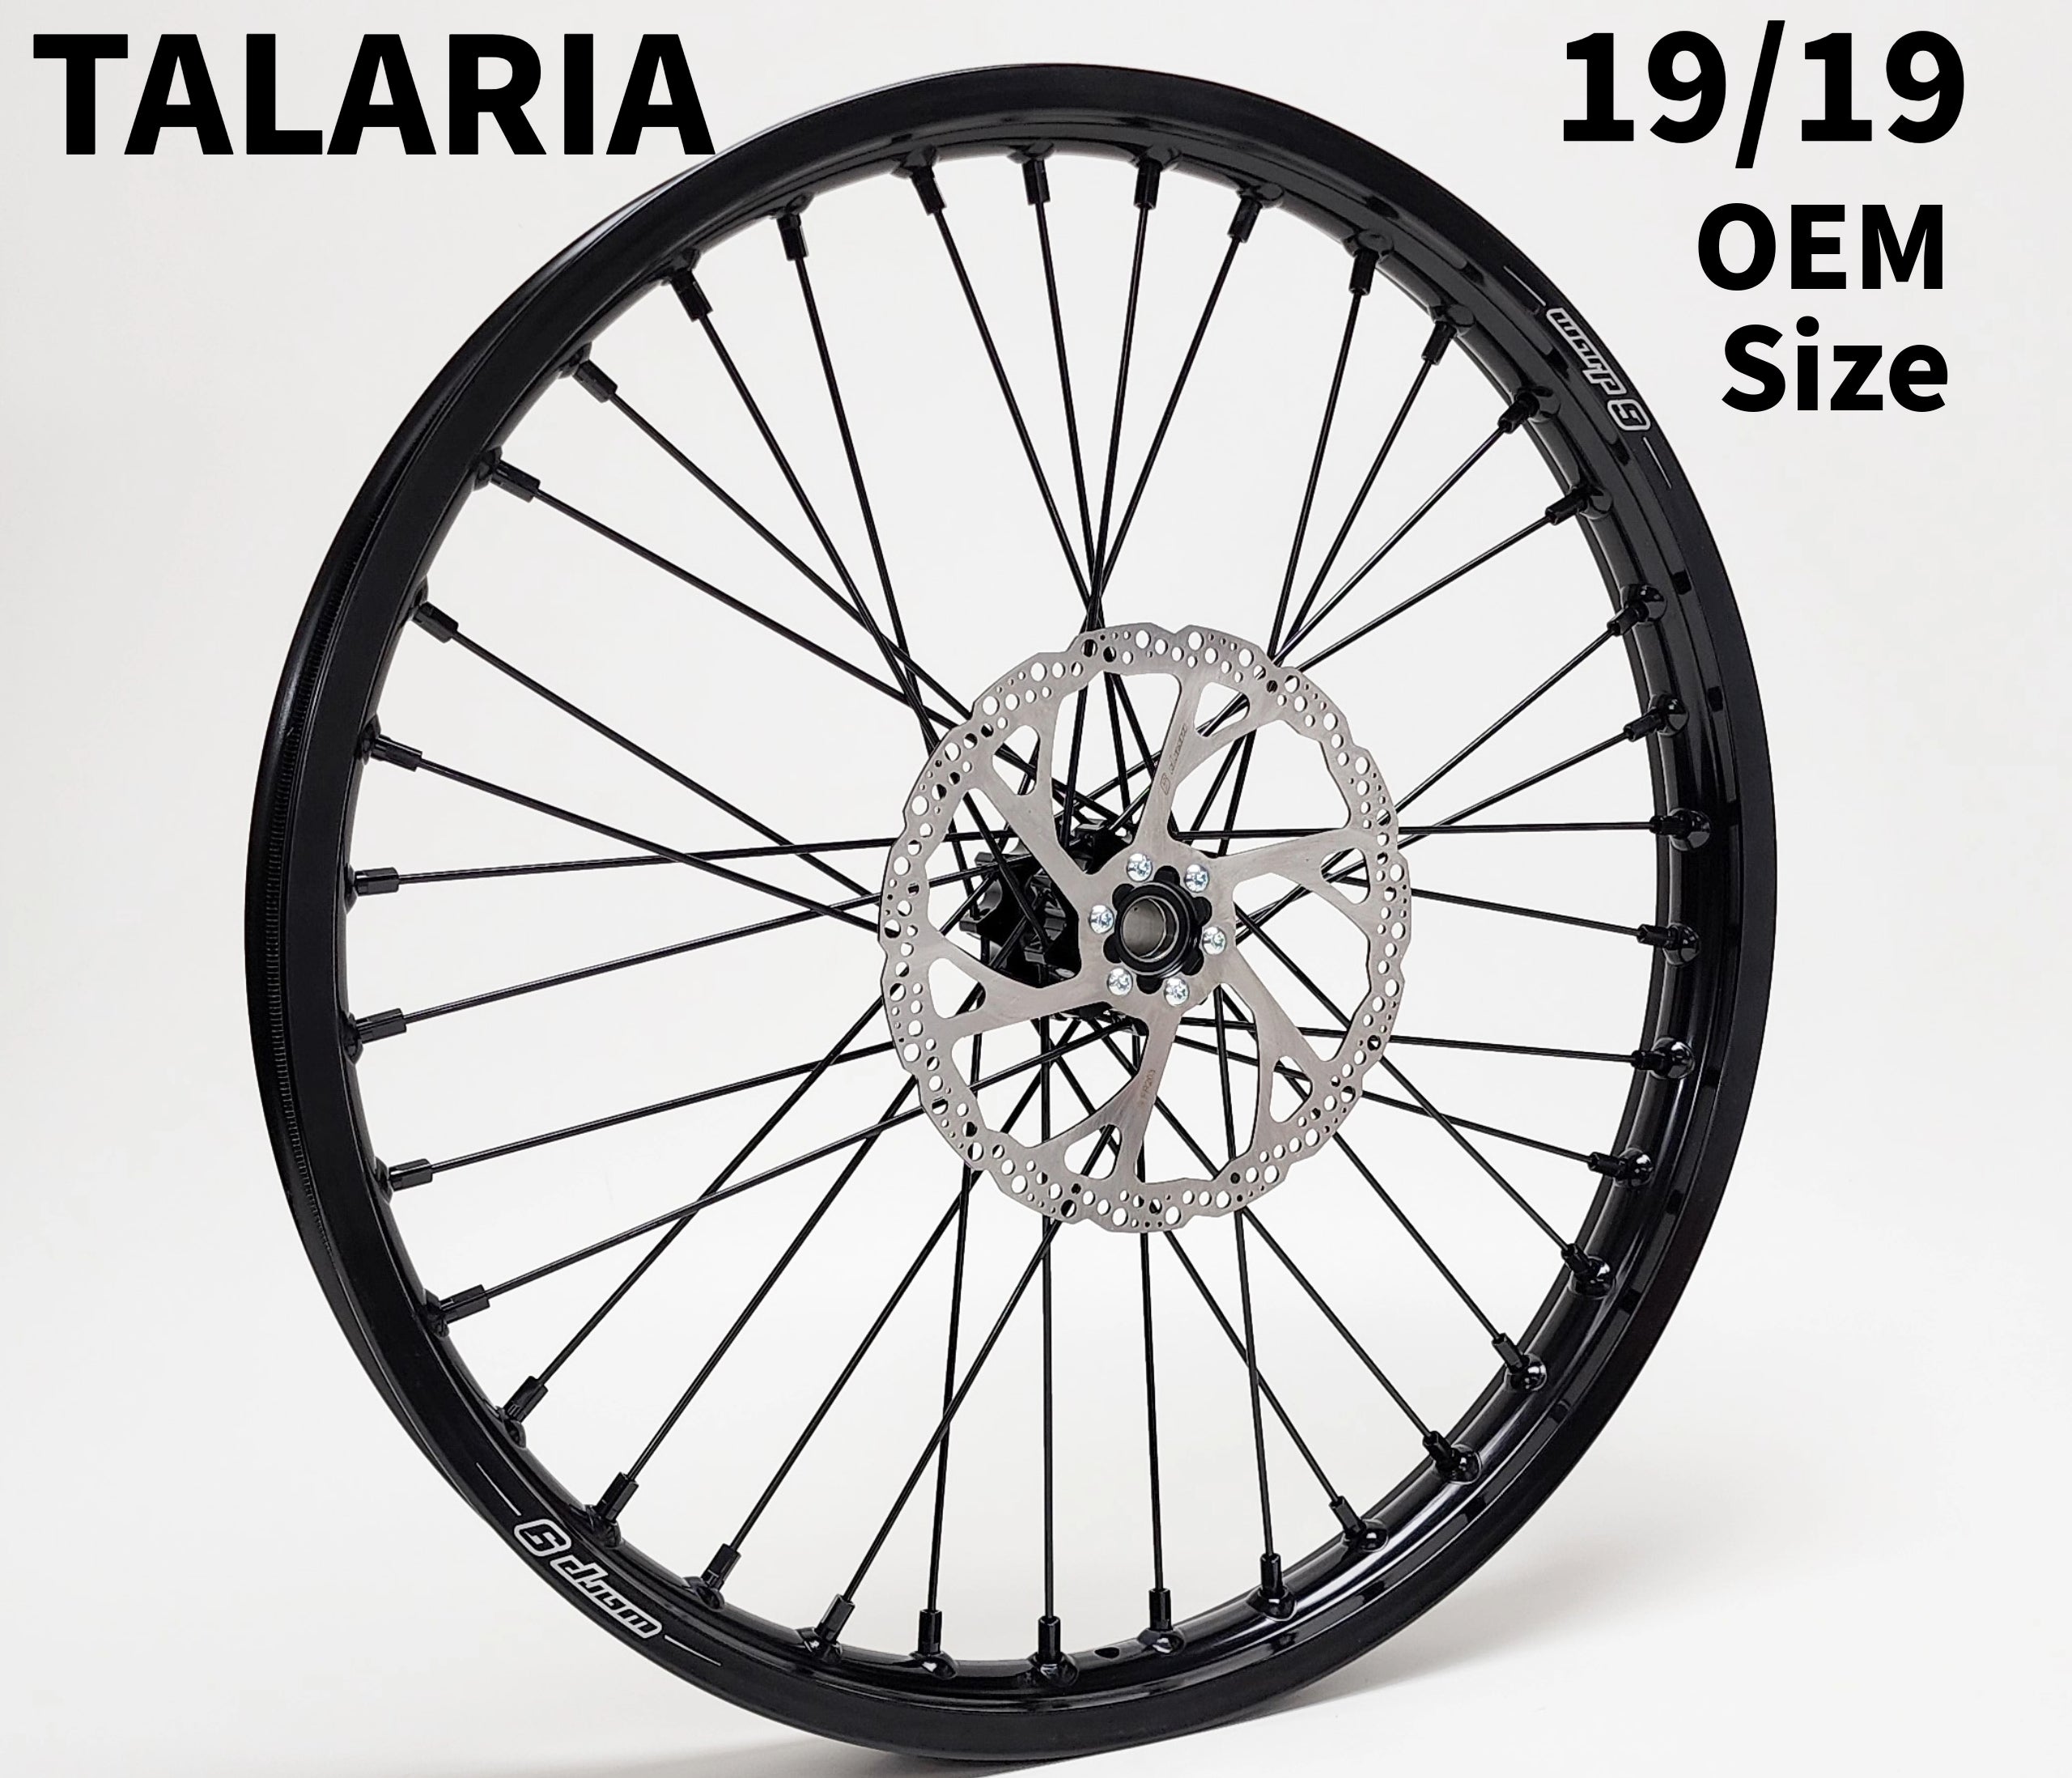 Warp 9 Complete 19/19in Upgraded Wheel Set for Talaria (OEM Size)